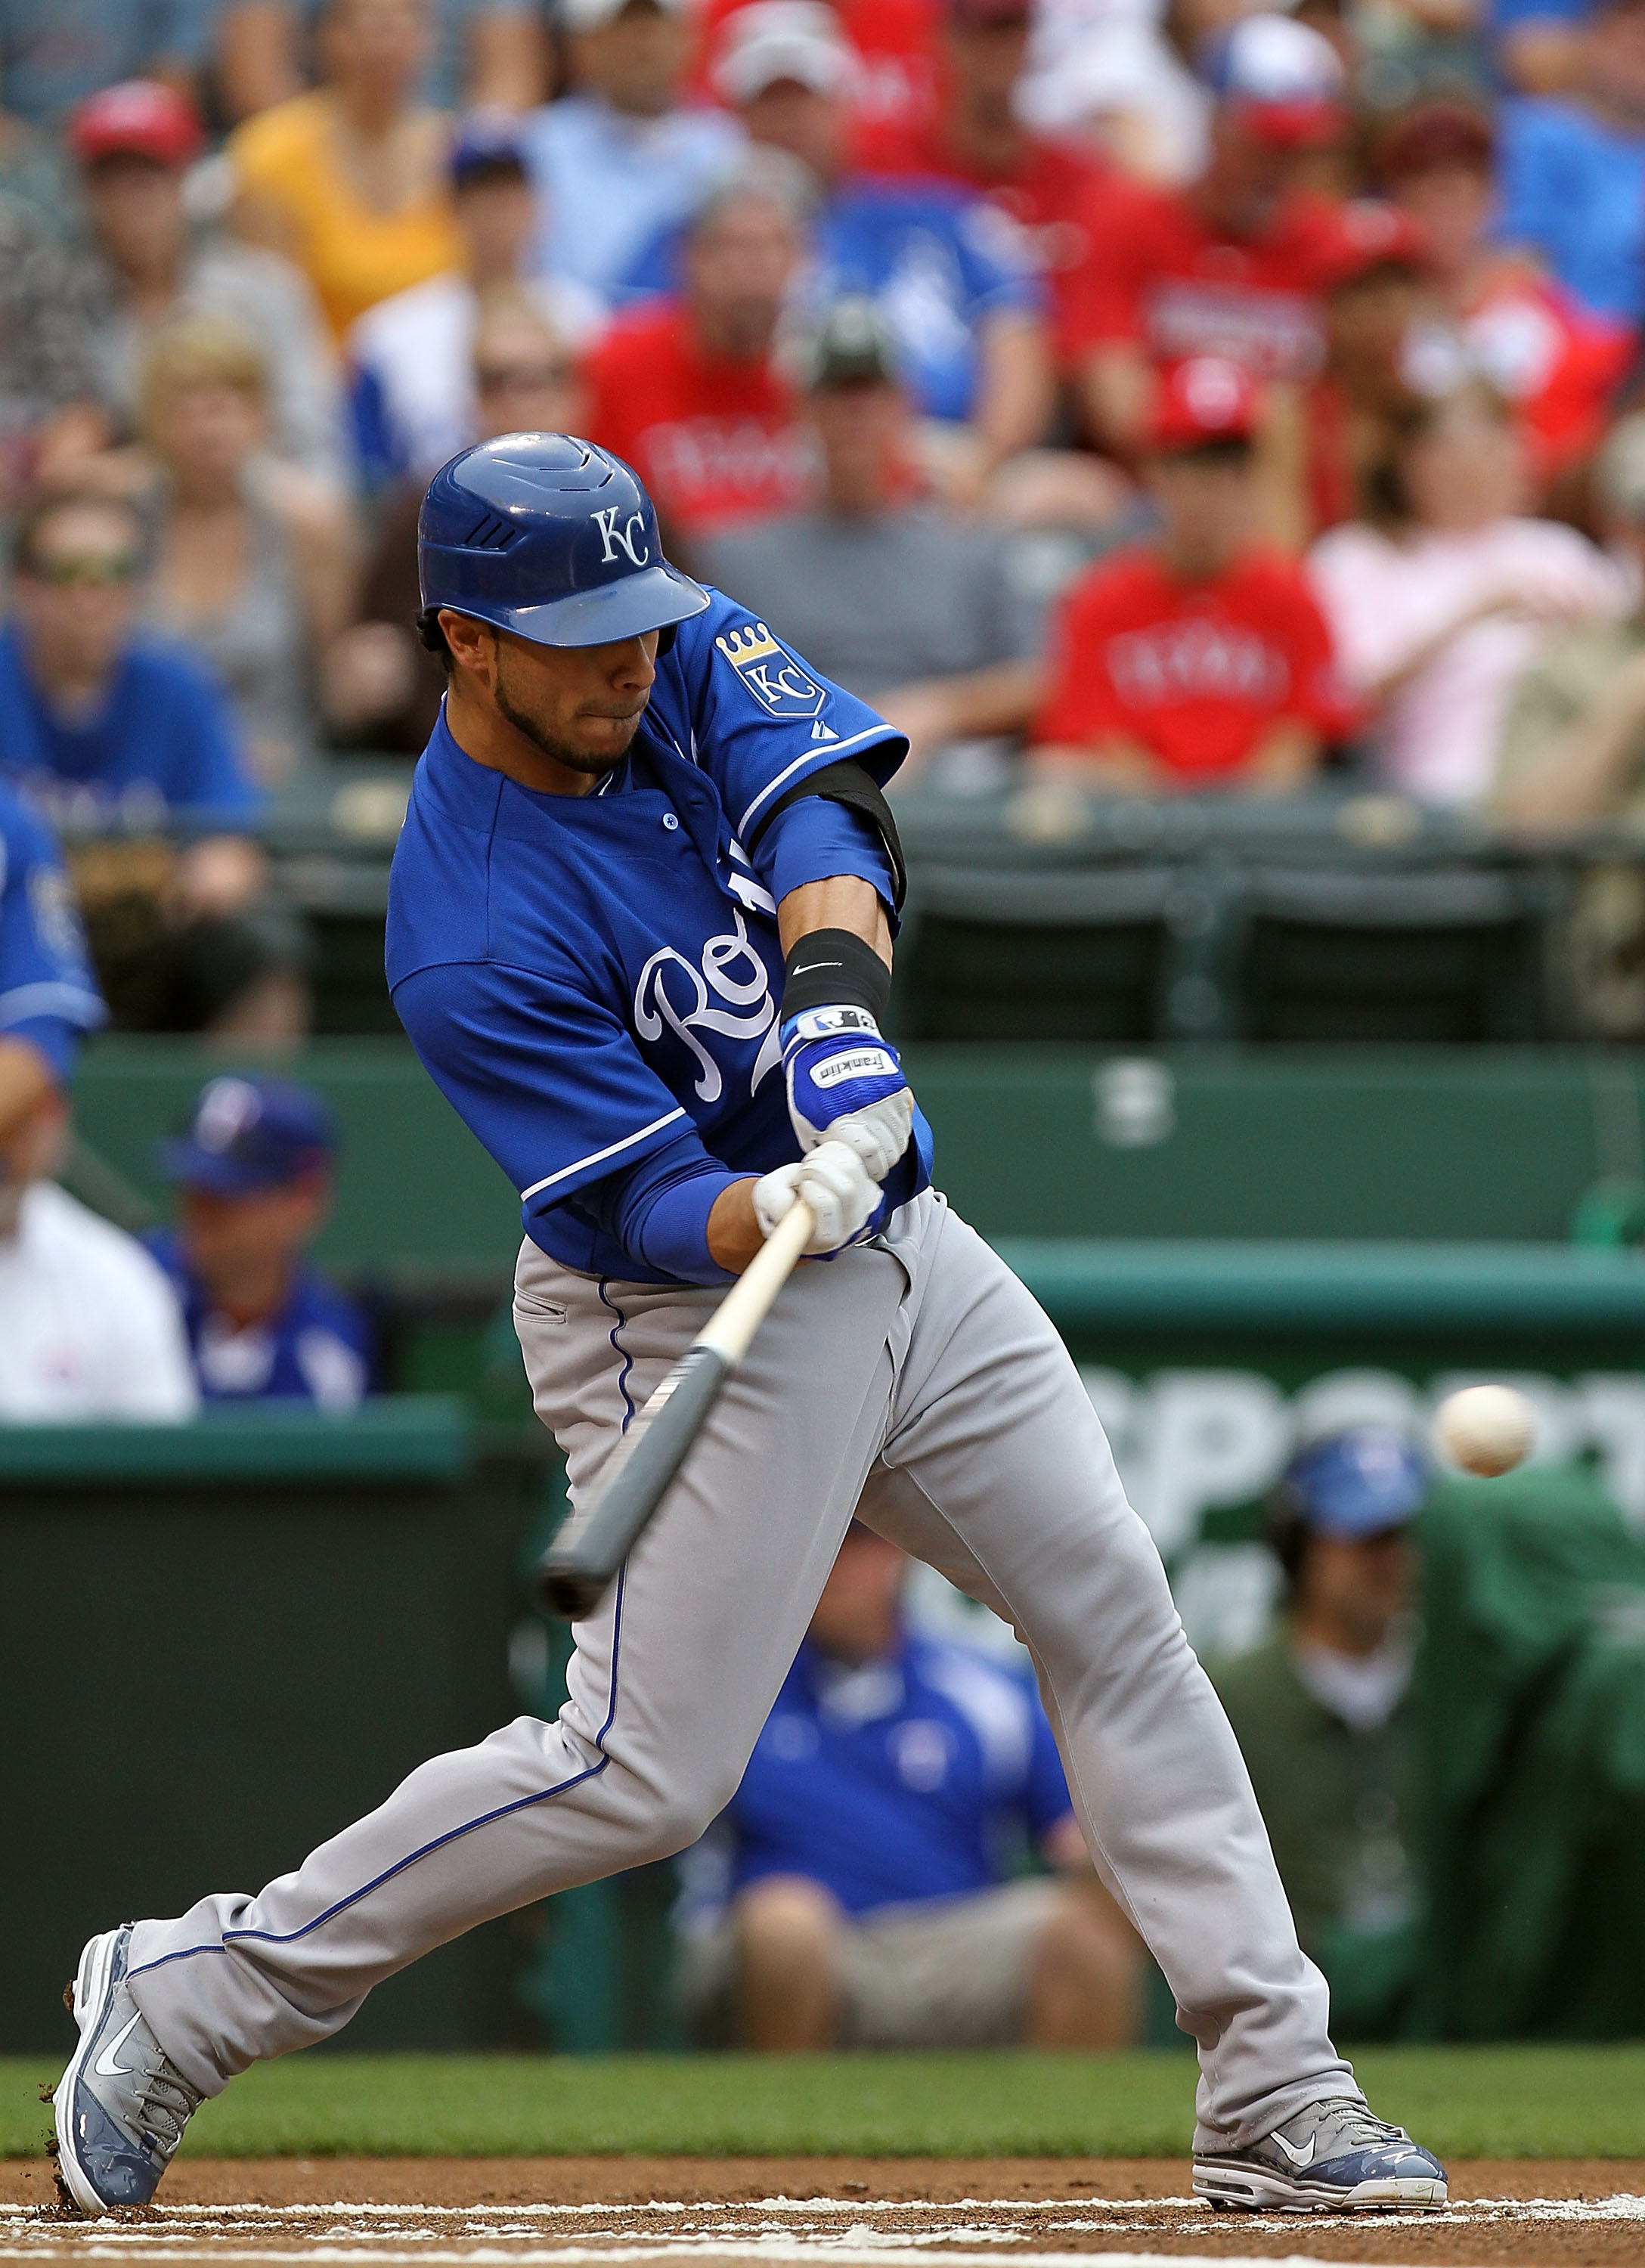 ARLINGTON, TX - APRIL 24:  Mike Aviles #13 of the Kansas City Royals hits a single against the Texas Rangers at Rangers Ballpark in Arlington on April 24, 2011 in Arlington, Texas.  (Photo by Ronald Martinez/Getty Images)